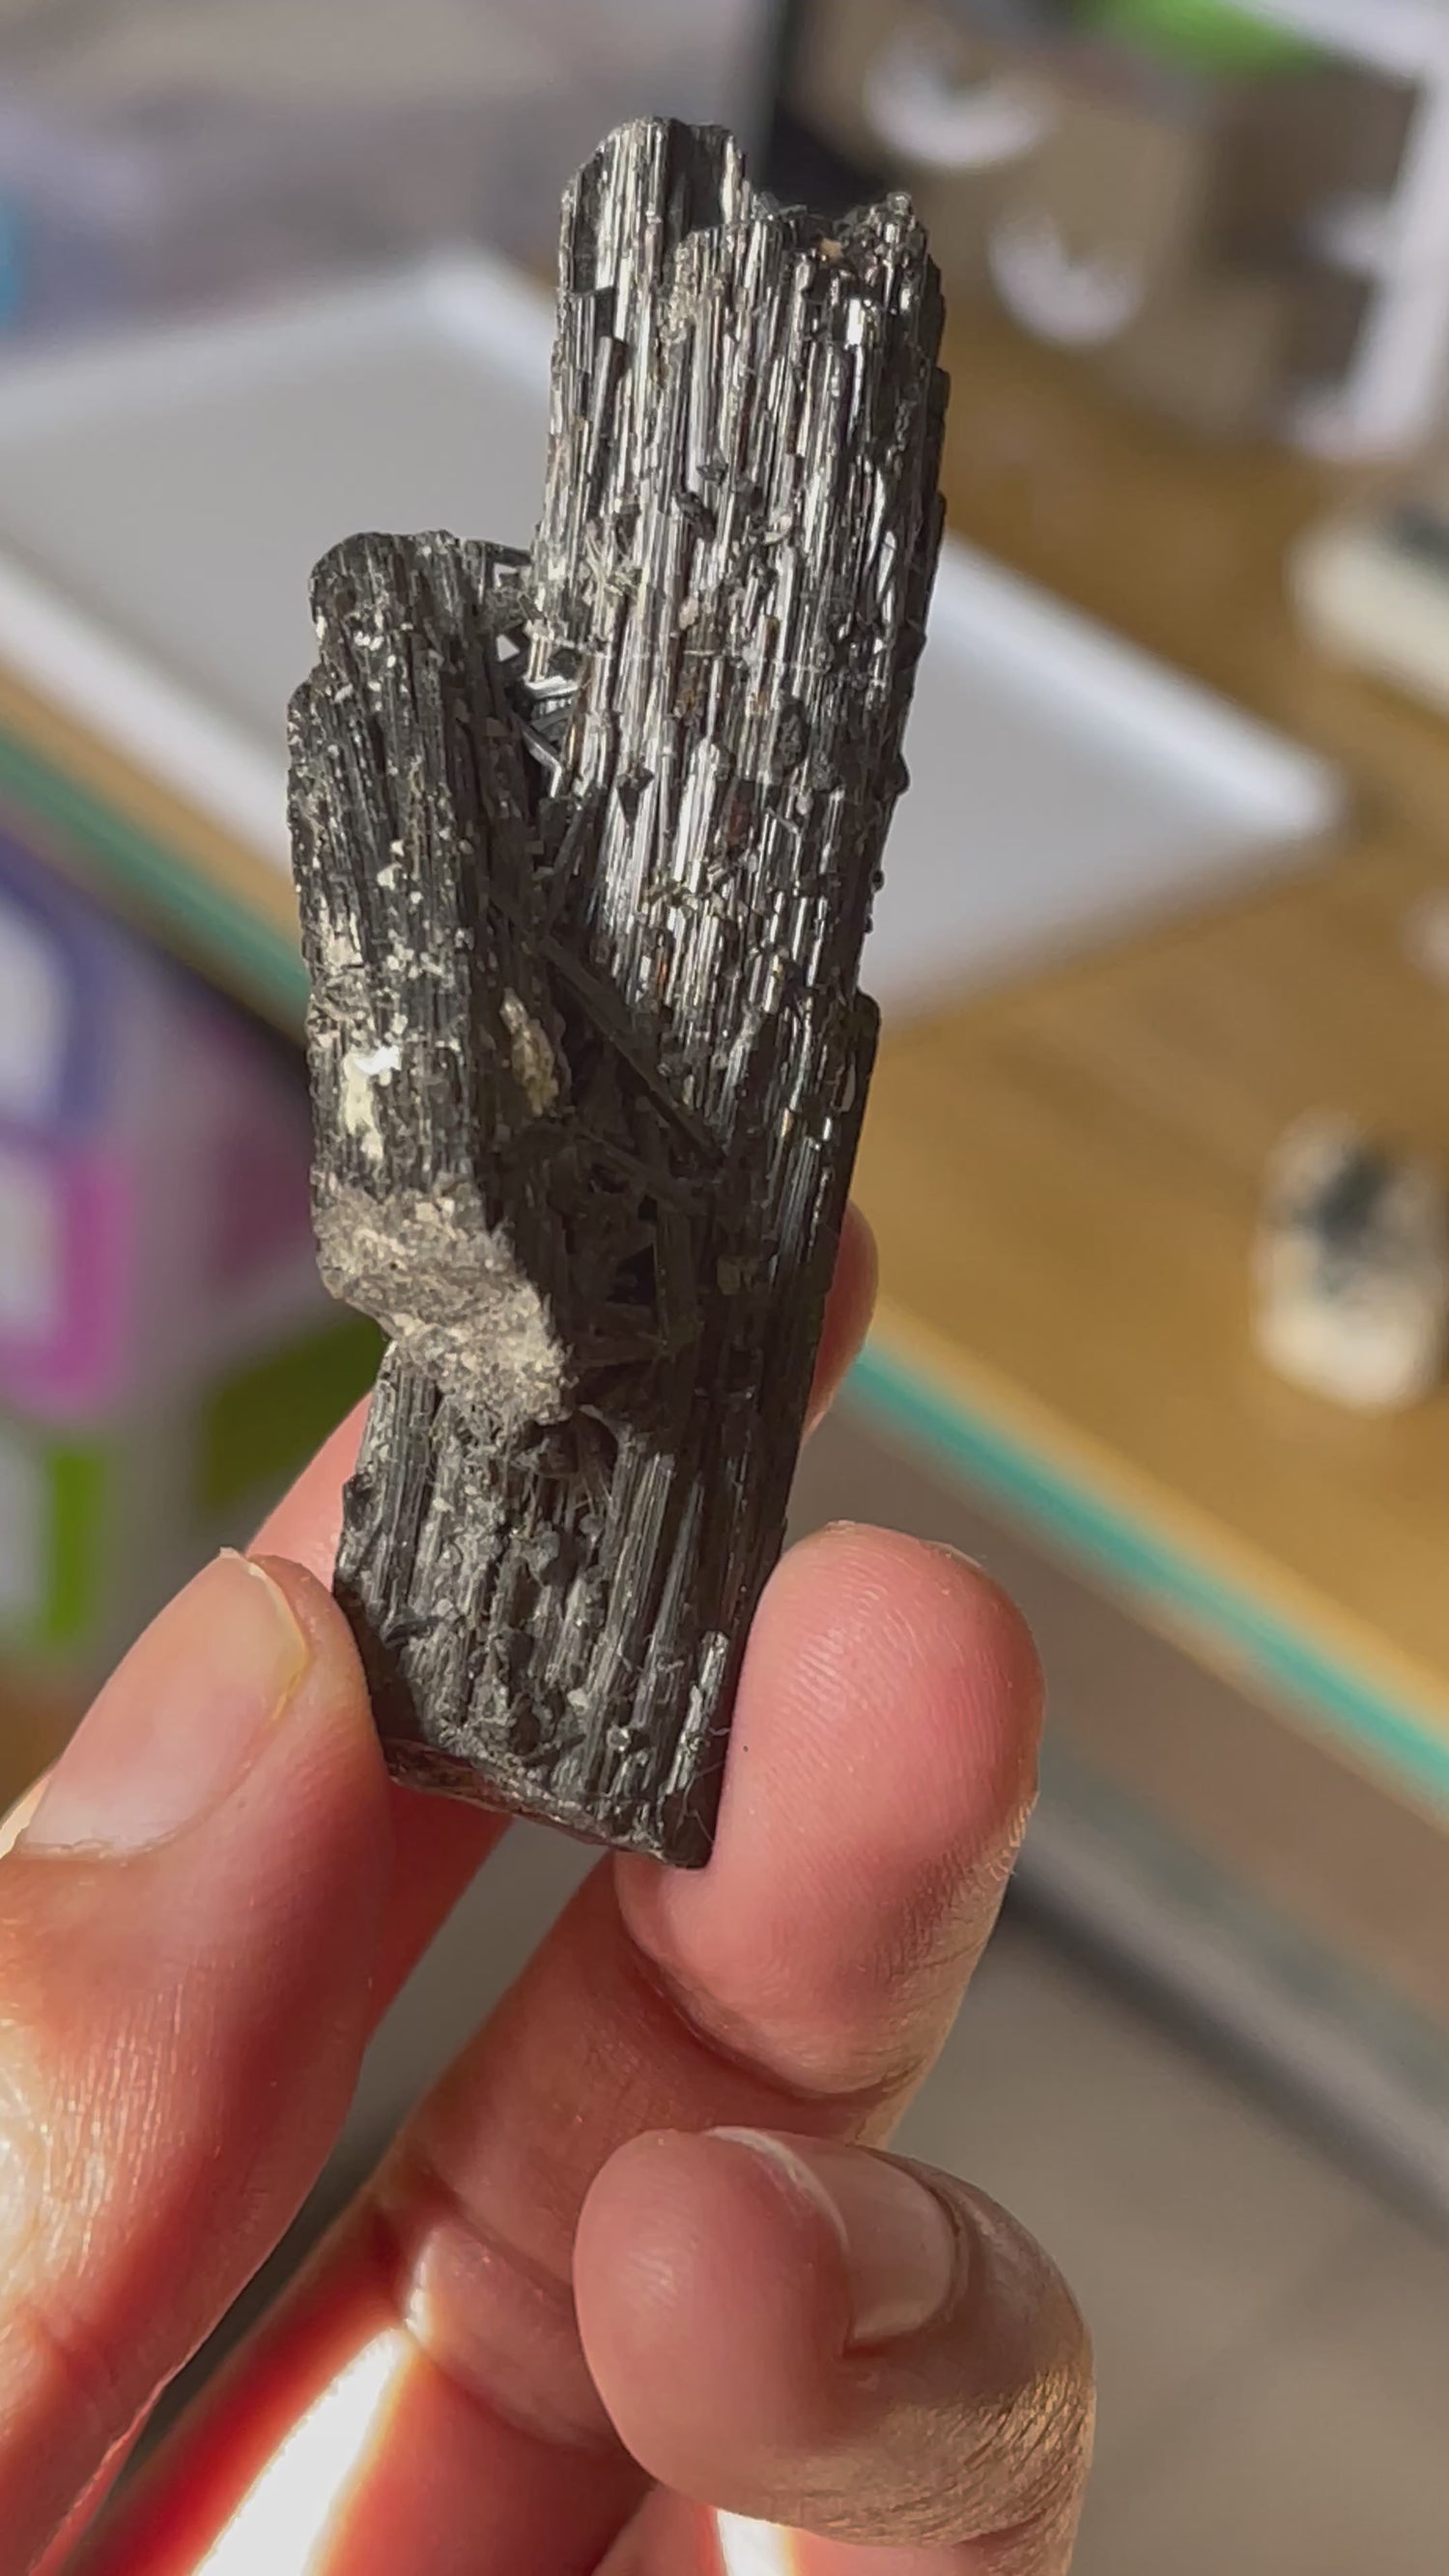 You May Also Like This Black Tourmaline Crystal video.